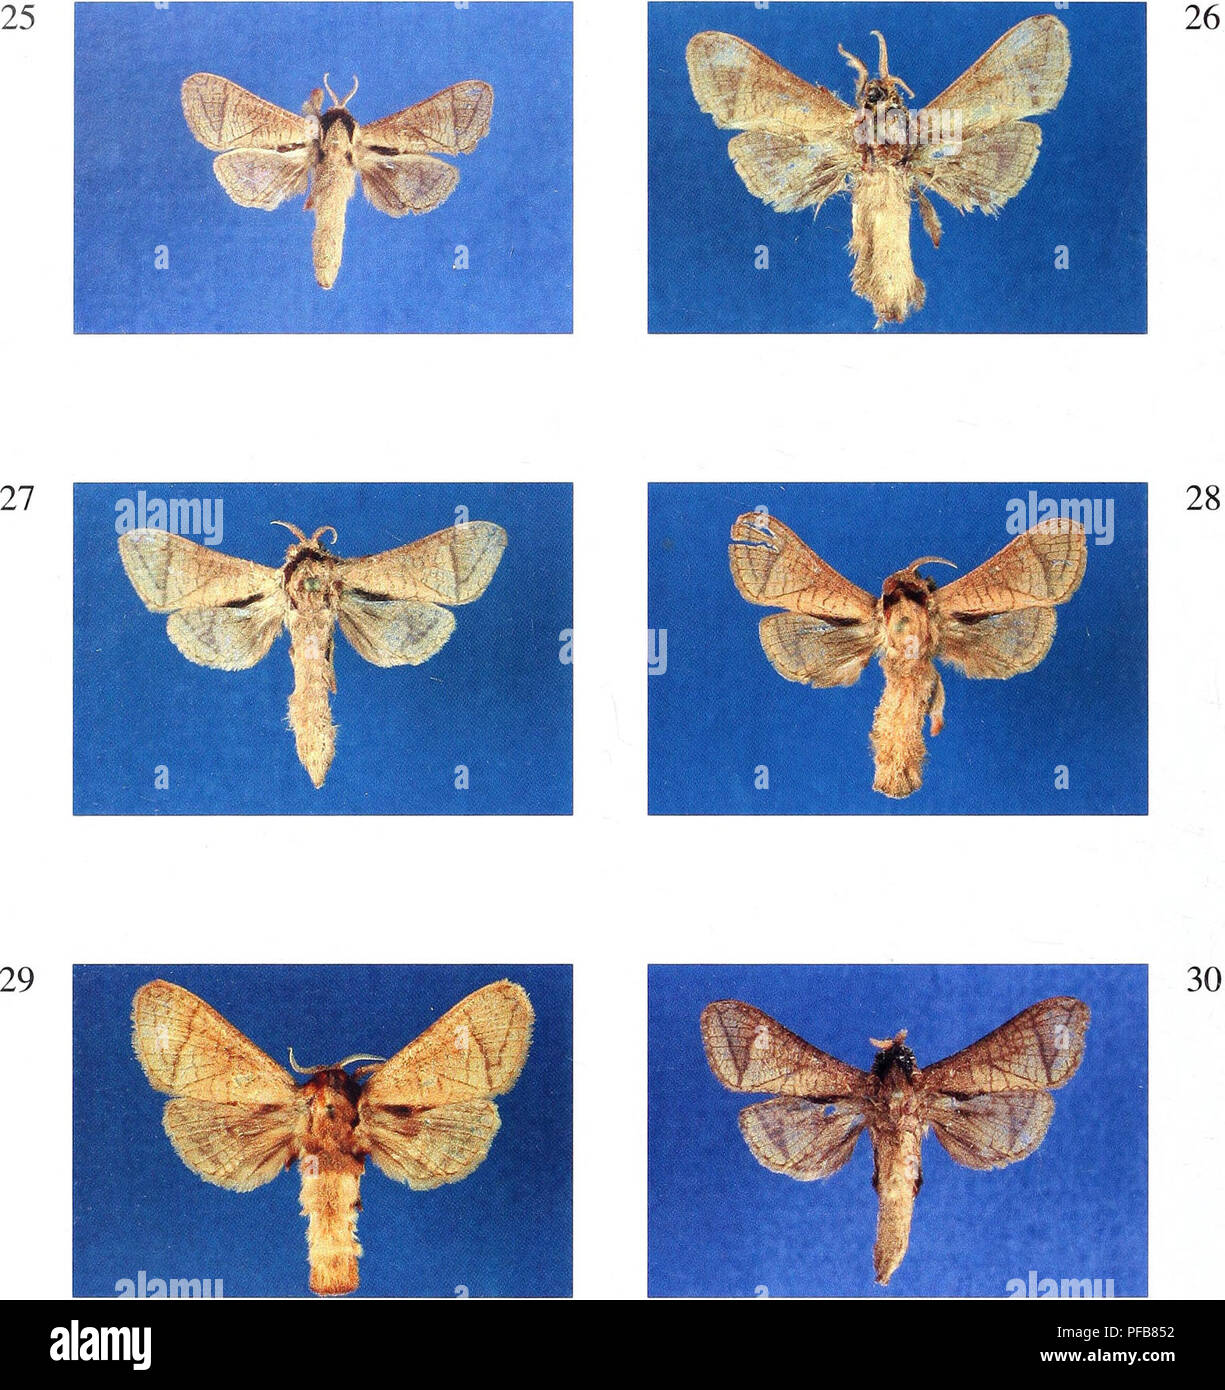 . The description of a new genus and twenty-three new species of Metarbelidae (Lepidoptera : Cossoidea) from the lowland tropical rain forests of the Guineo-Congolian Region with notes on habitats and biogeography / Ingo Lehmannn. 64. Figure 25. Haberlandia rohdei spec, no v., male, holotype, Ghana, Accra, Achimota Forest Reserve. Figure 26. Haberlandia togoensis spec, no v., male, holotype, Togo, region Centrale. Figure 27. Haberlandia hollowayi spec, nov., male, holotype, Cote dTvoire, Lagunes region, Bingerville. Figure 28. Haberlandia janzi spec, nov., male, holotype, Cote dT voire, Maraho Stock Photo